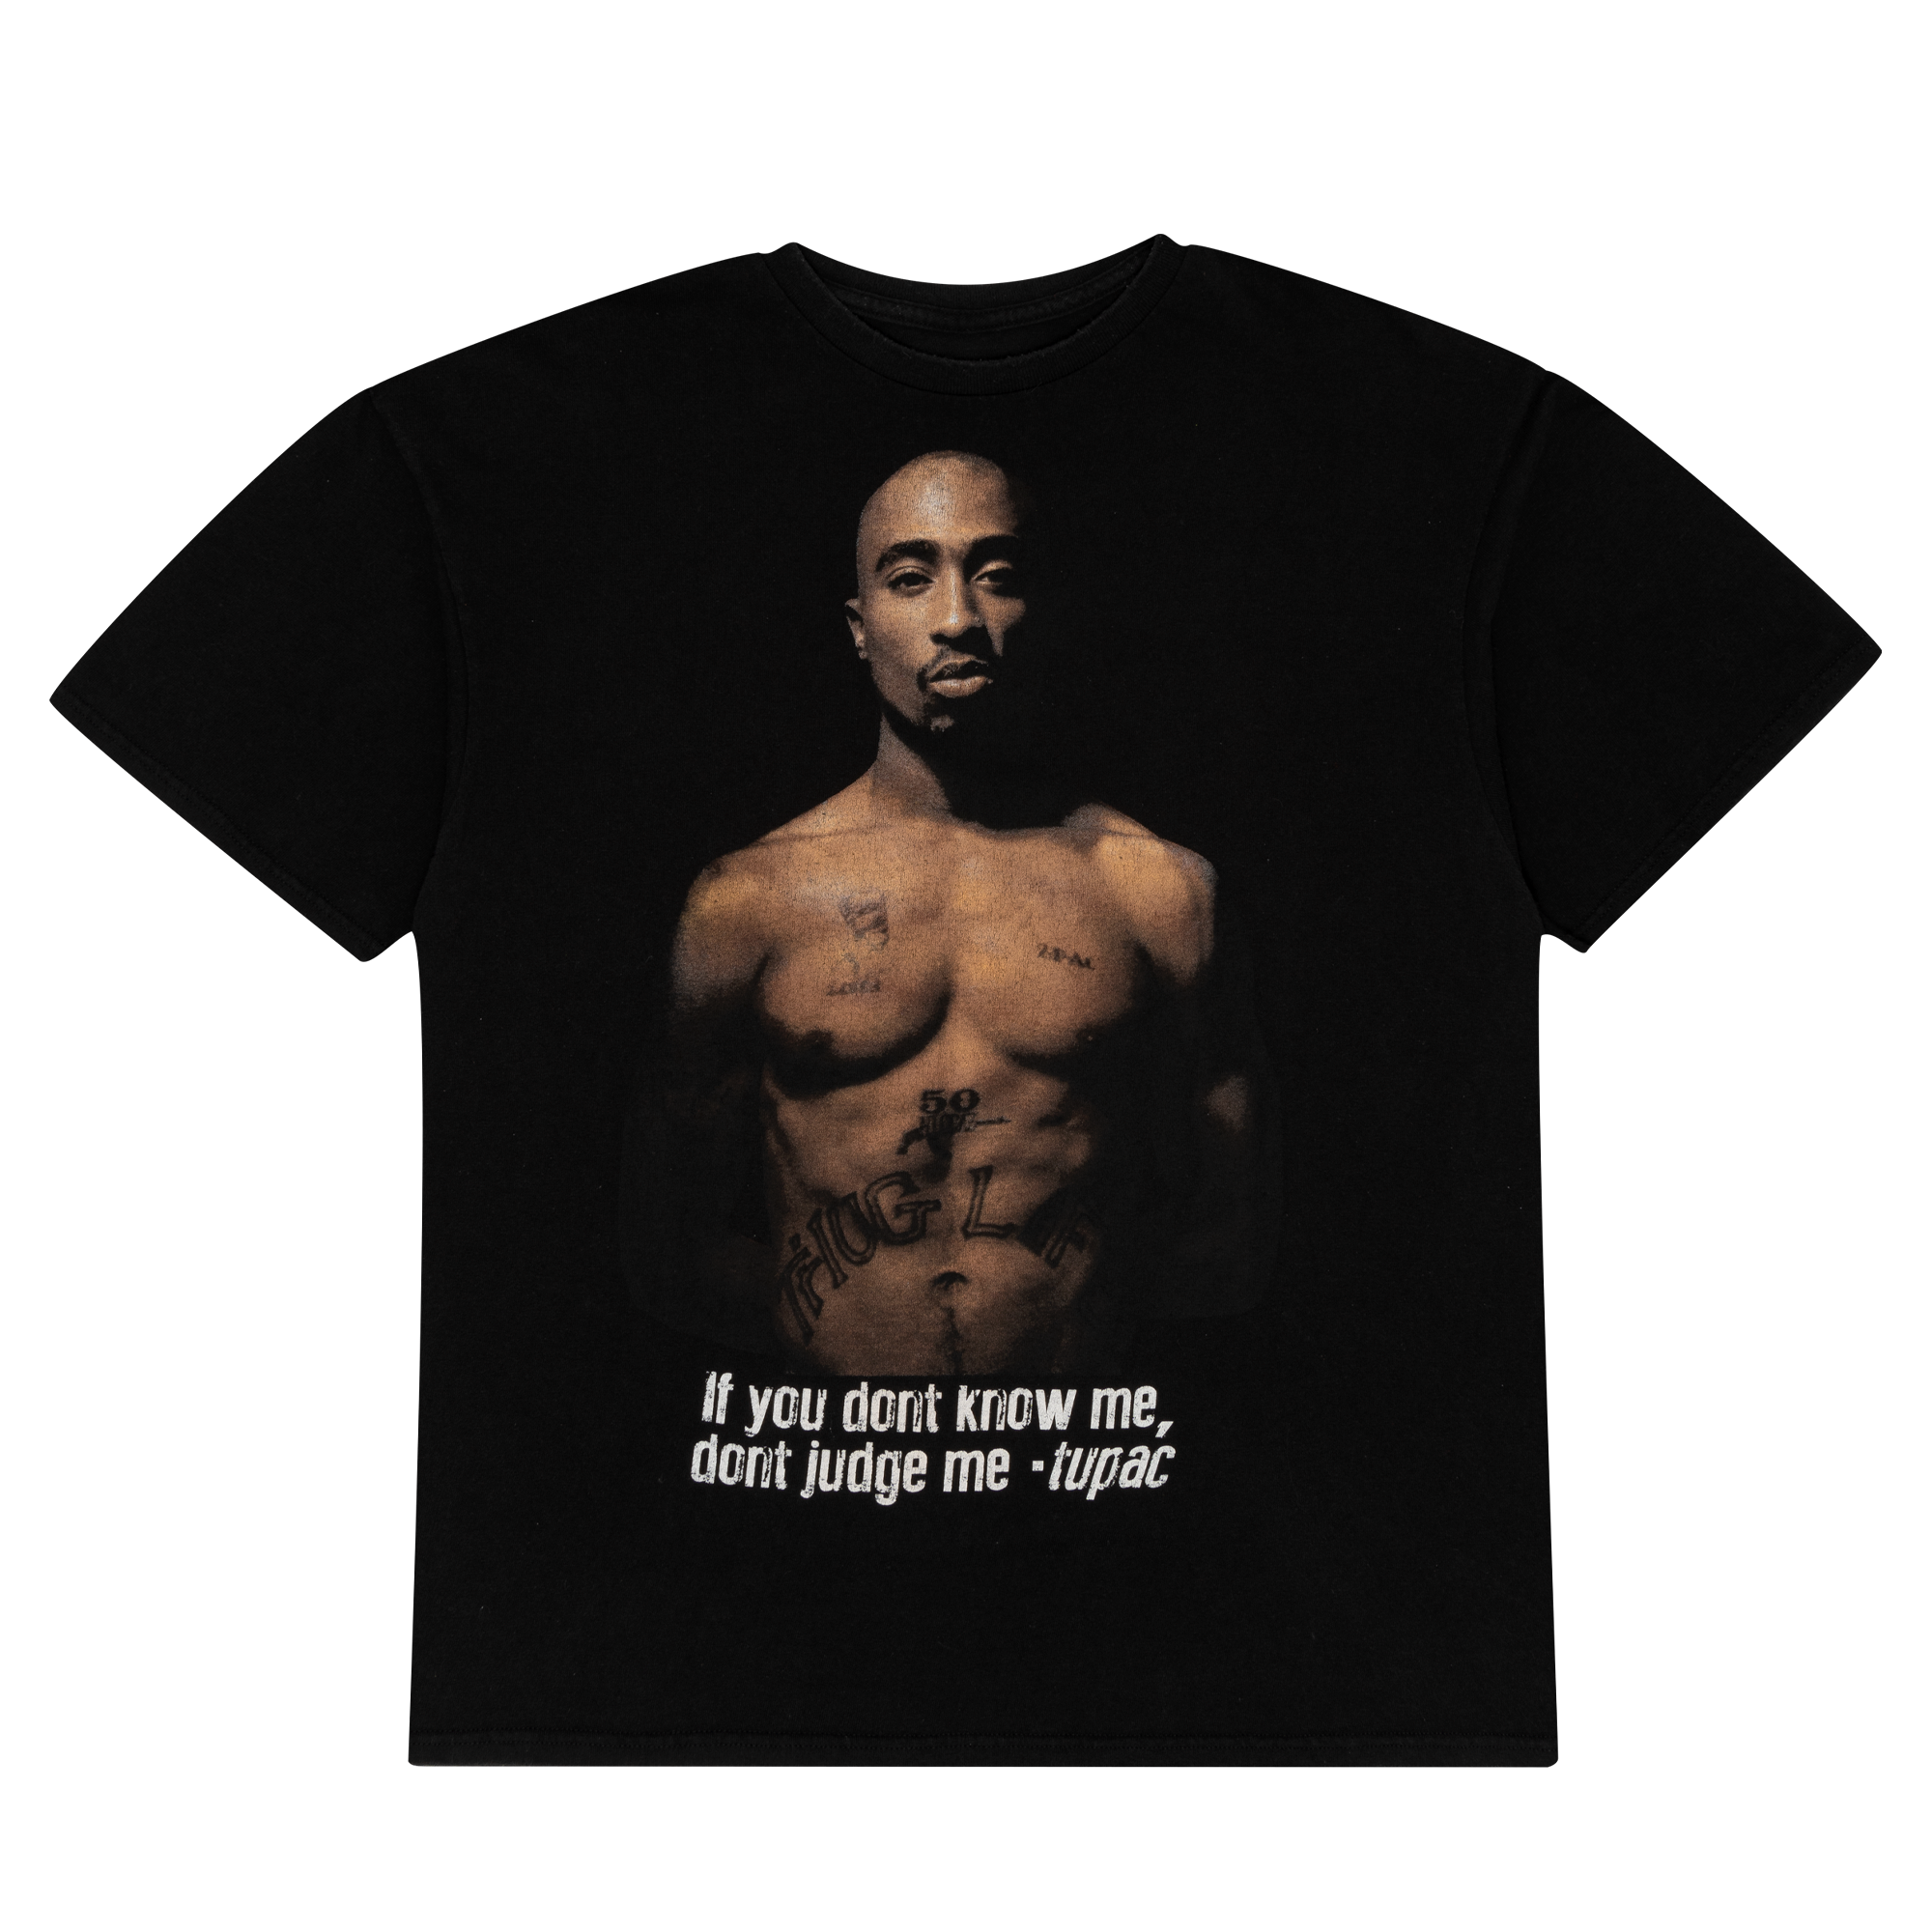 If You Don't Know Me, Don't Judge Me Tupac Tee Black-PLUS